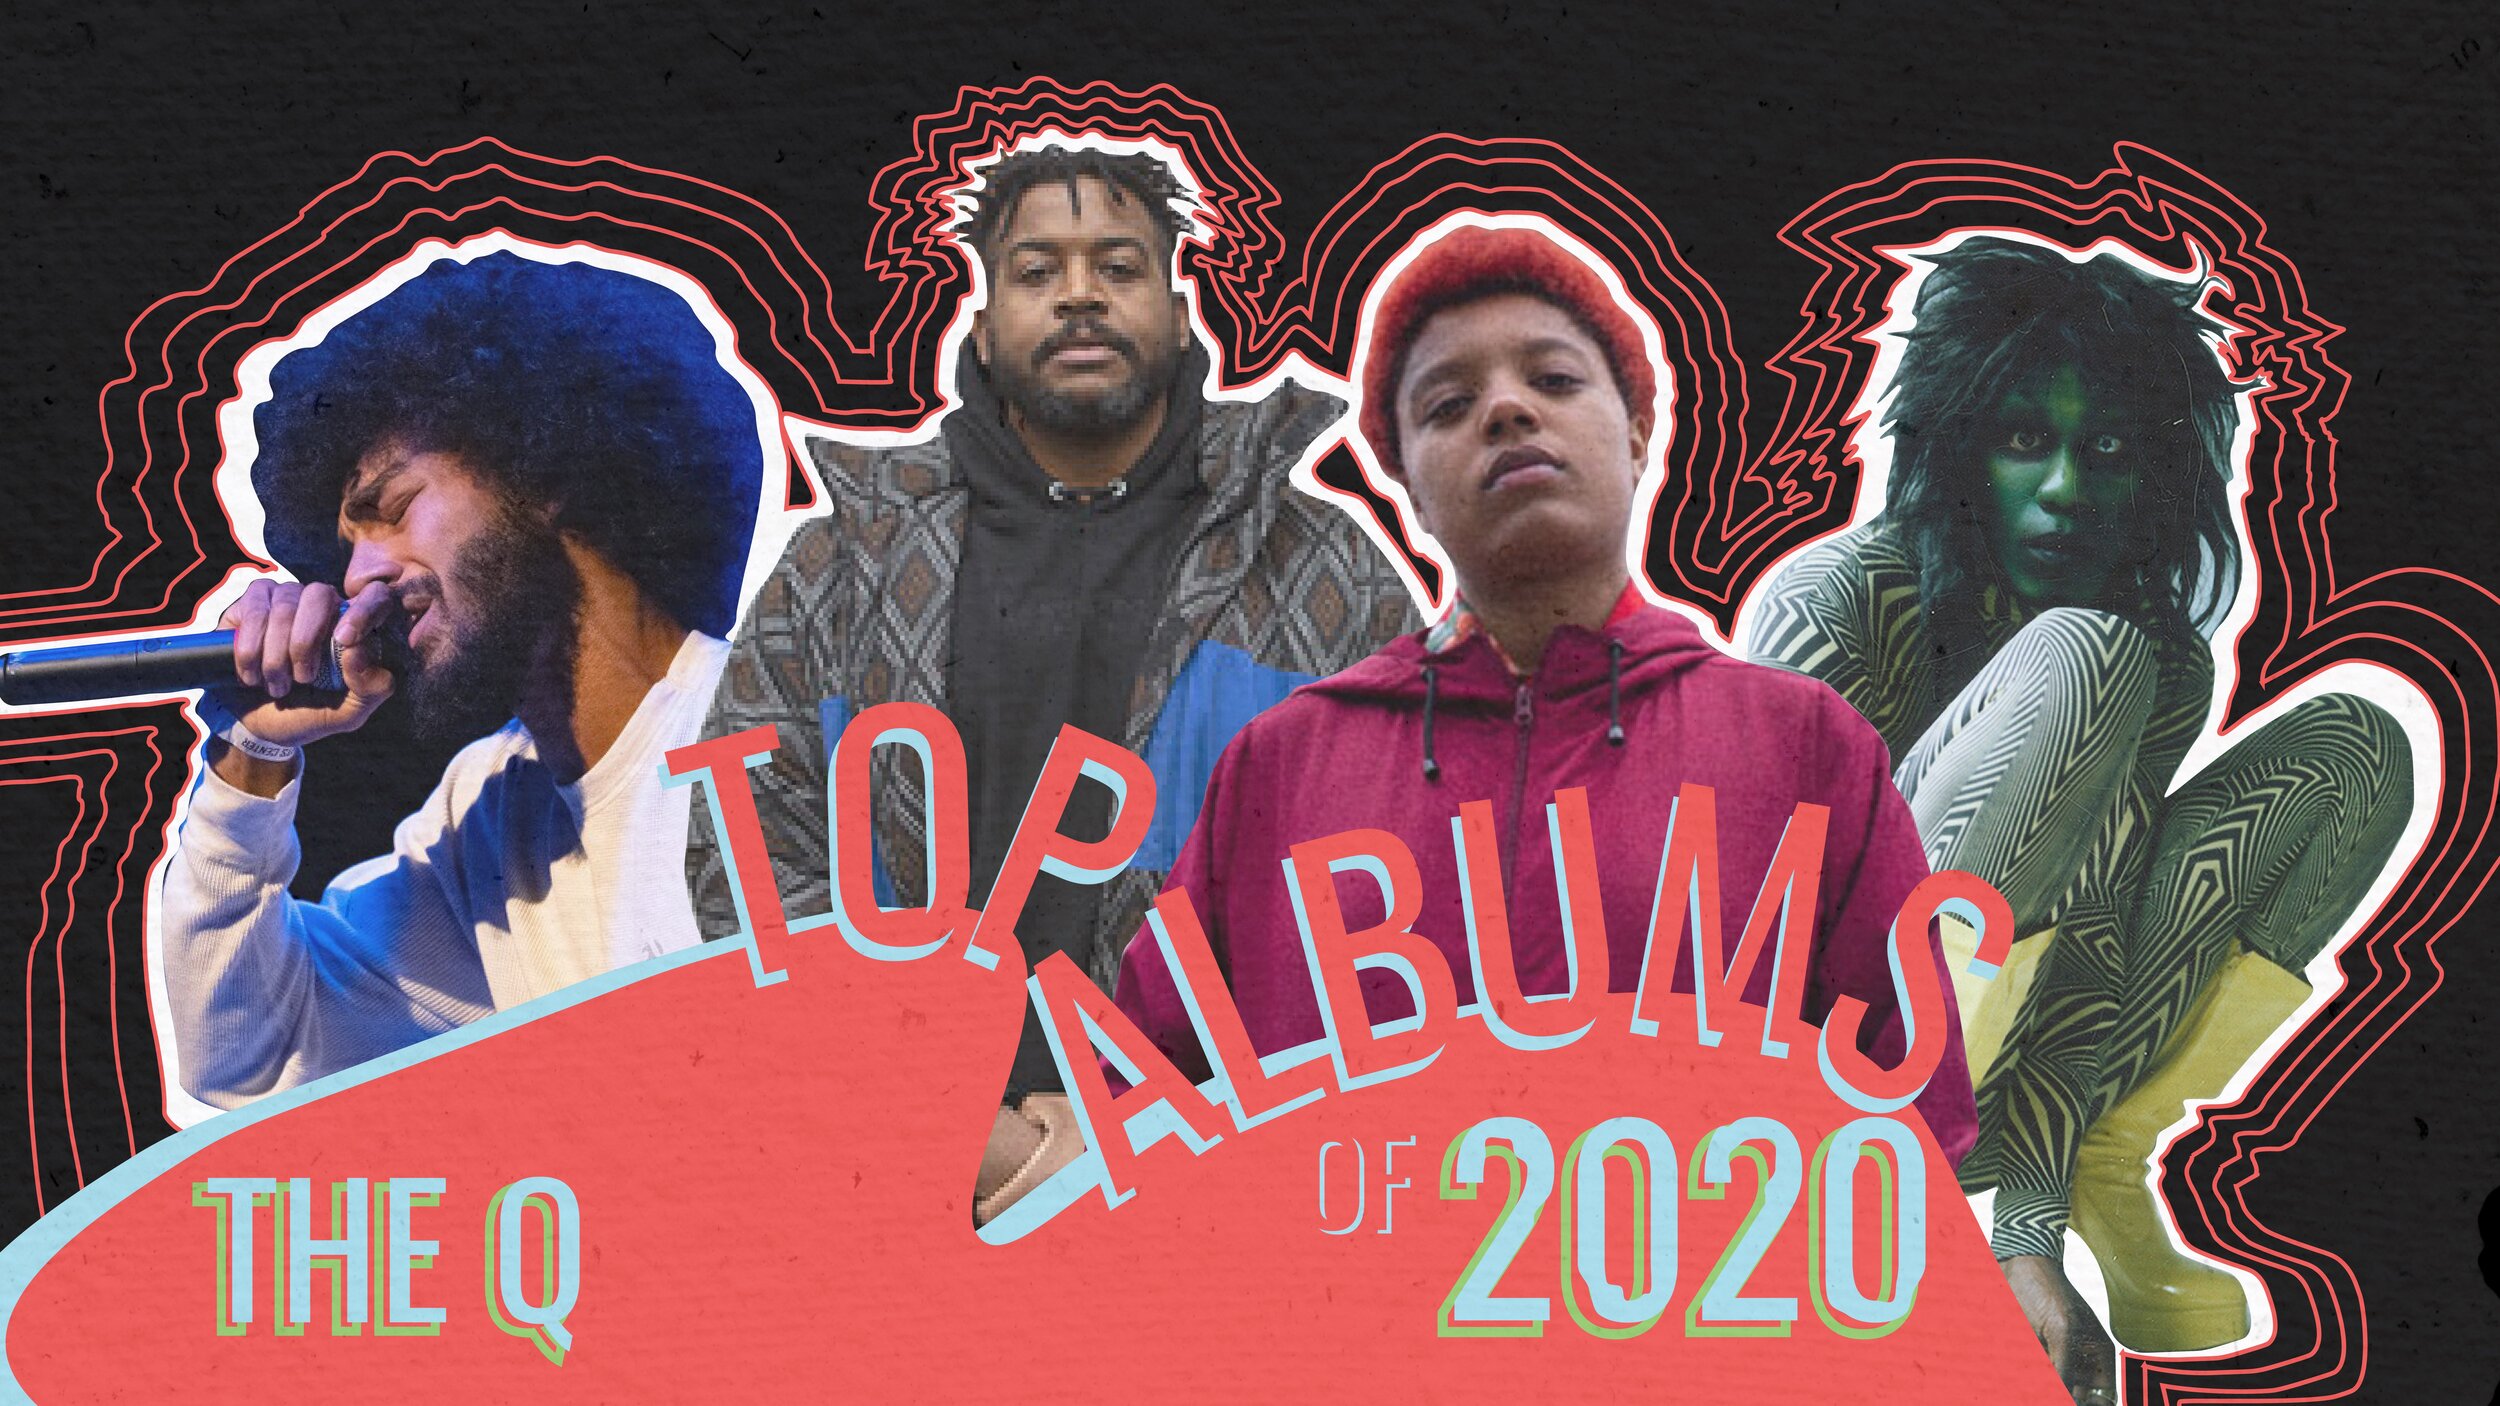 OUR TOP 50 ALBUMS OF 2020 — The Q